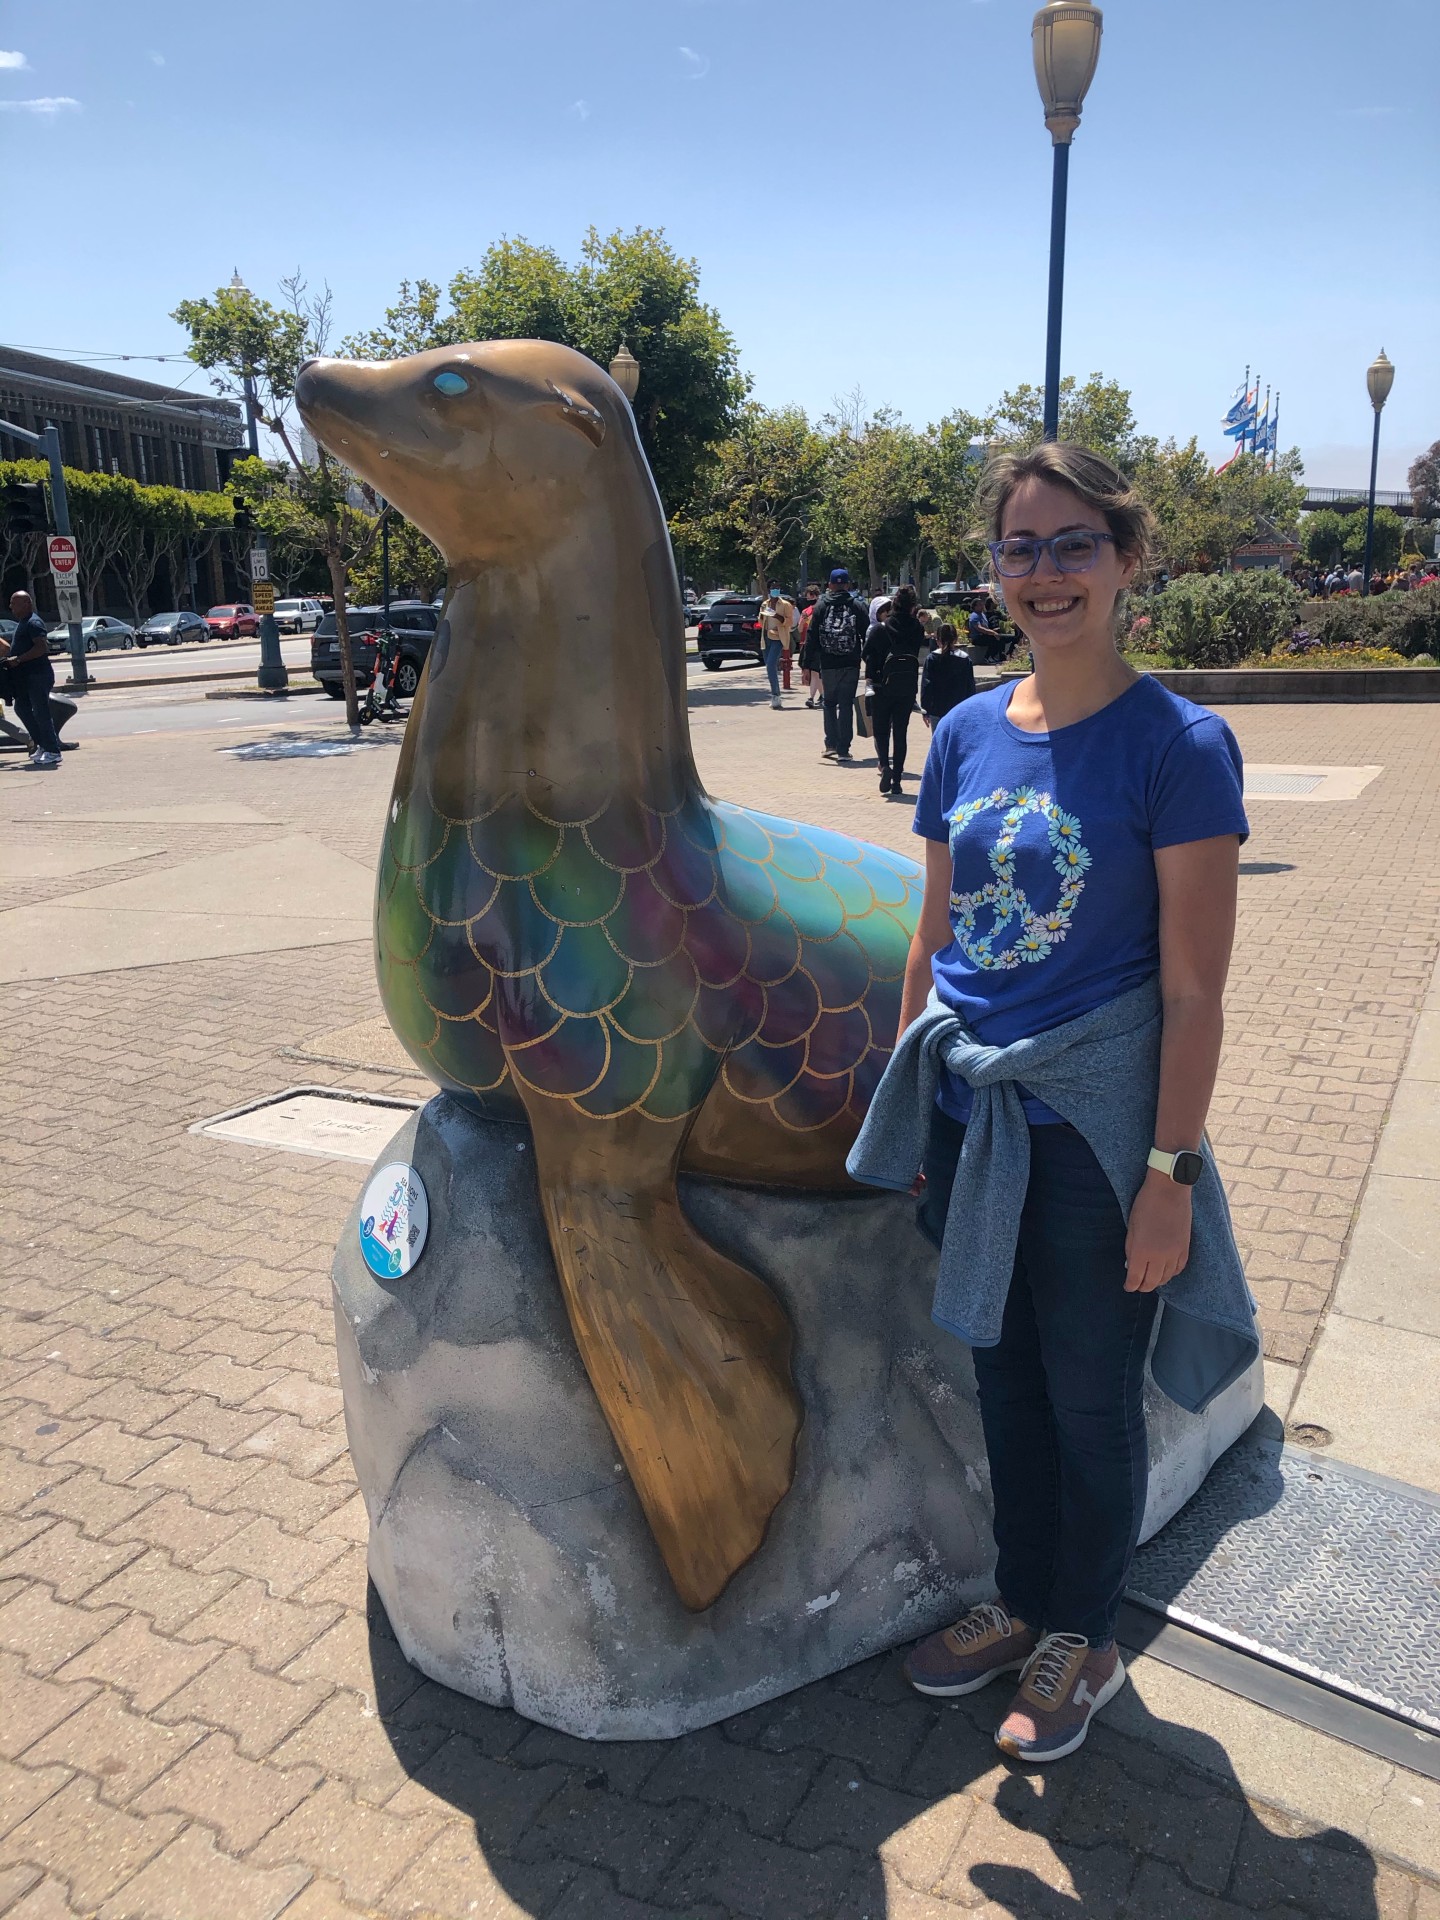 Stephanie Krause, Latin Teacher at McLean School, smiles at camera next to a sea lion statue